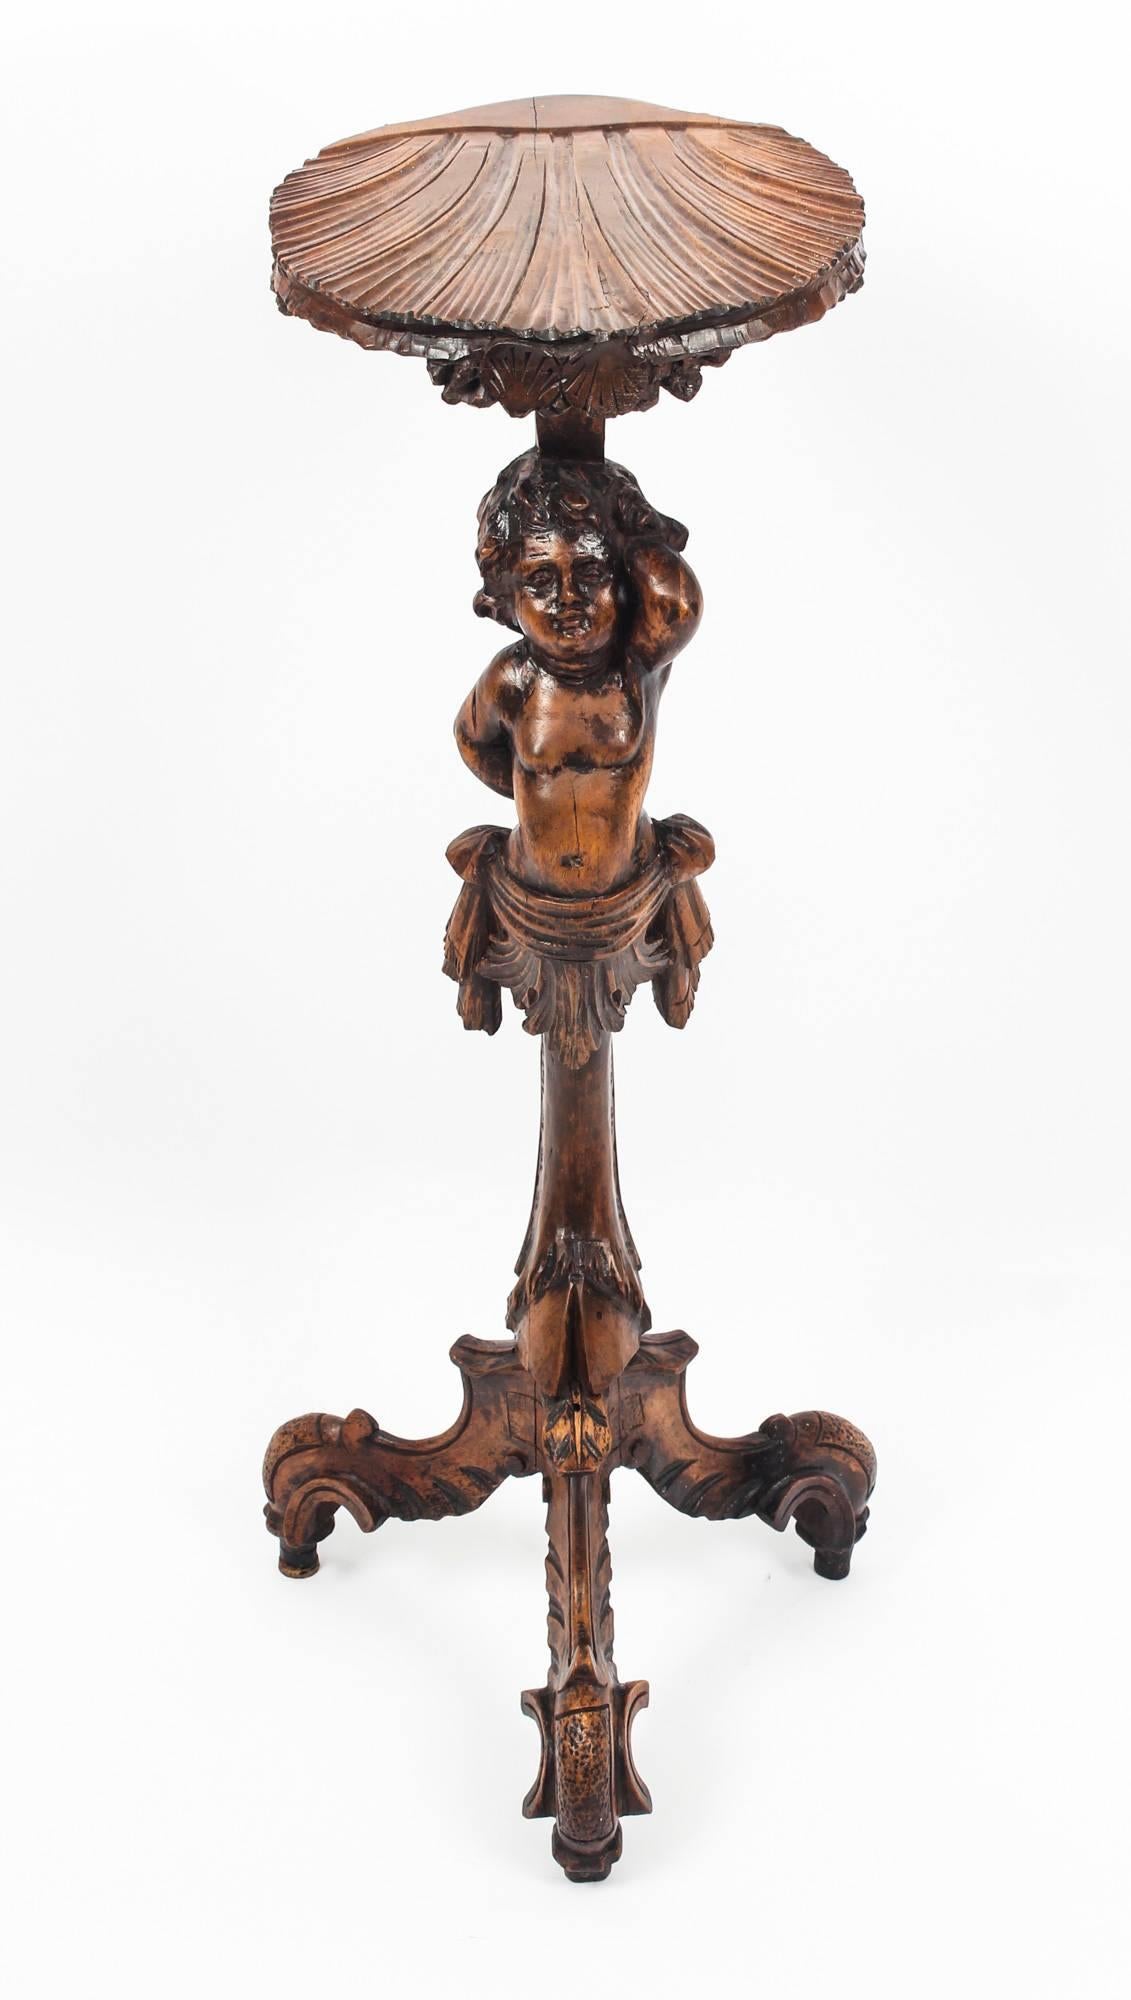 This is a beautiful antique Venetian, carved walnut cherub torchere in the Rococo revival style, circa 1820 in date.

The shell-shaped tray top is held aloft by a carved cherub an raised on a scrolling tripod base.

It is a very beautiful piece